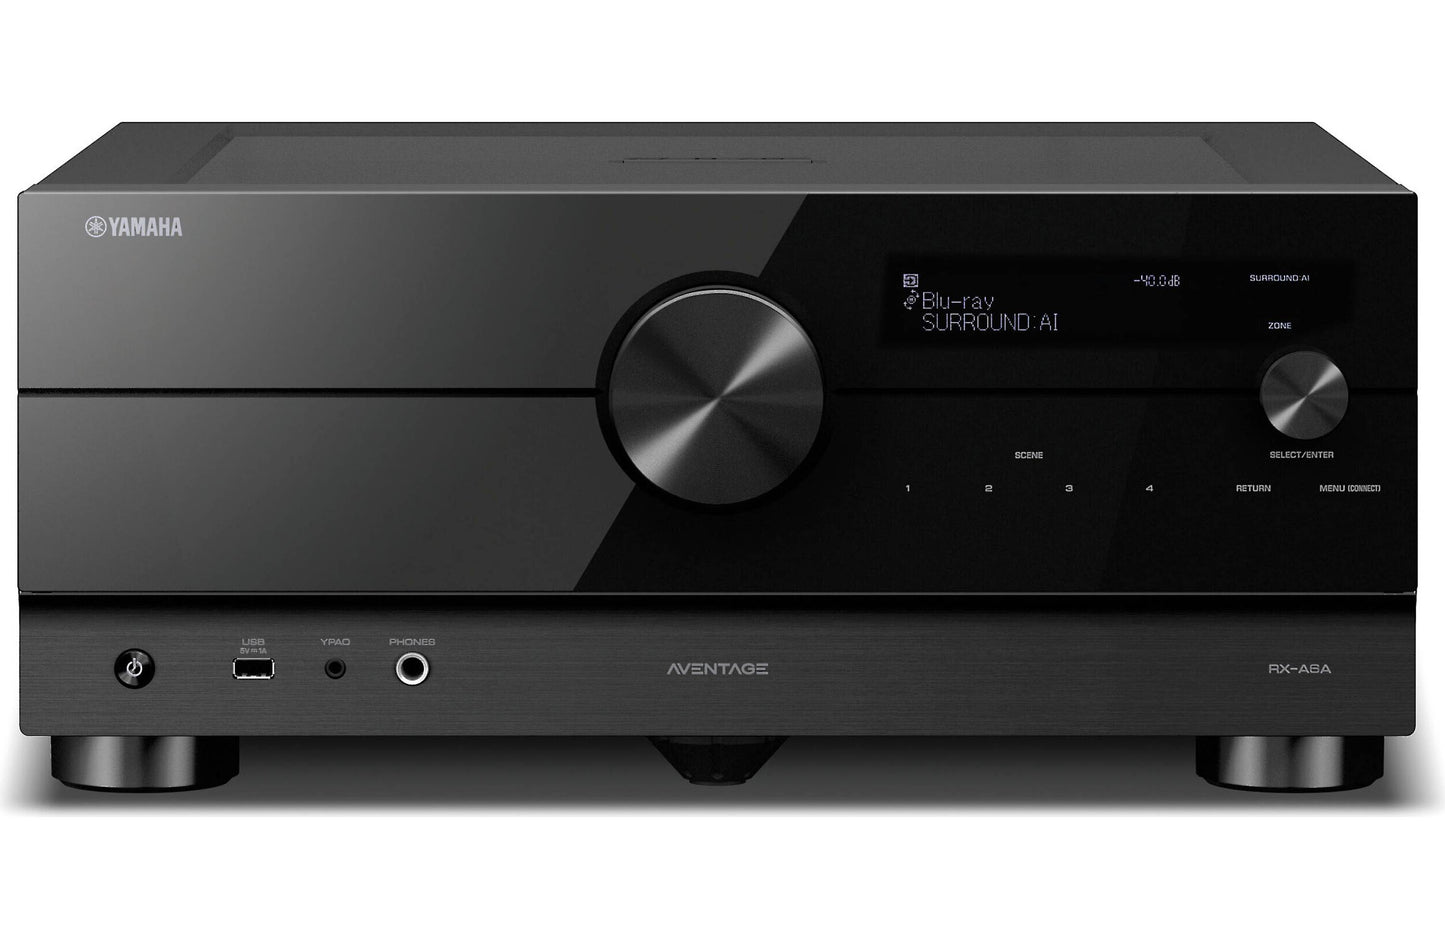 Yamaha AVENTAGE RX-A6A 9.2 Channel Home Theater Receiver with Dolby Atmos®, Wi-Fi®, Bluetooth®